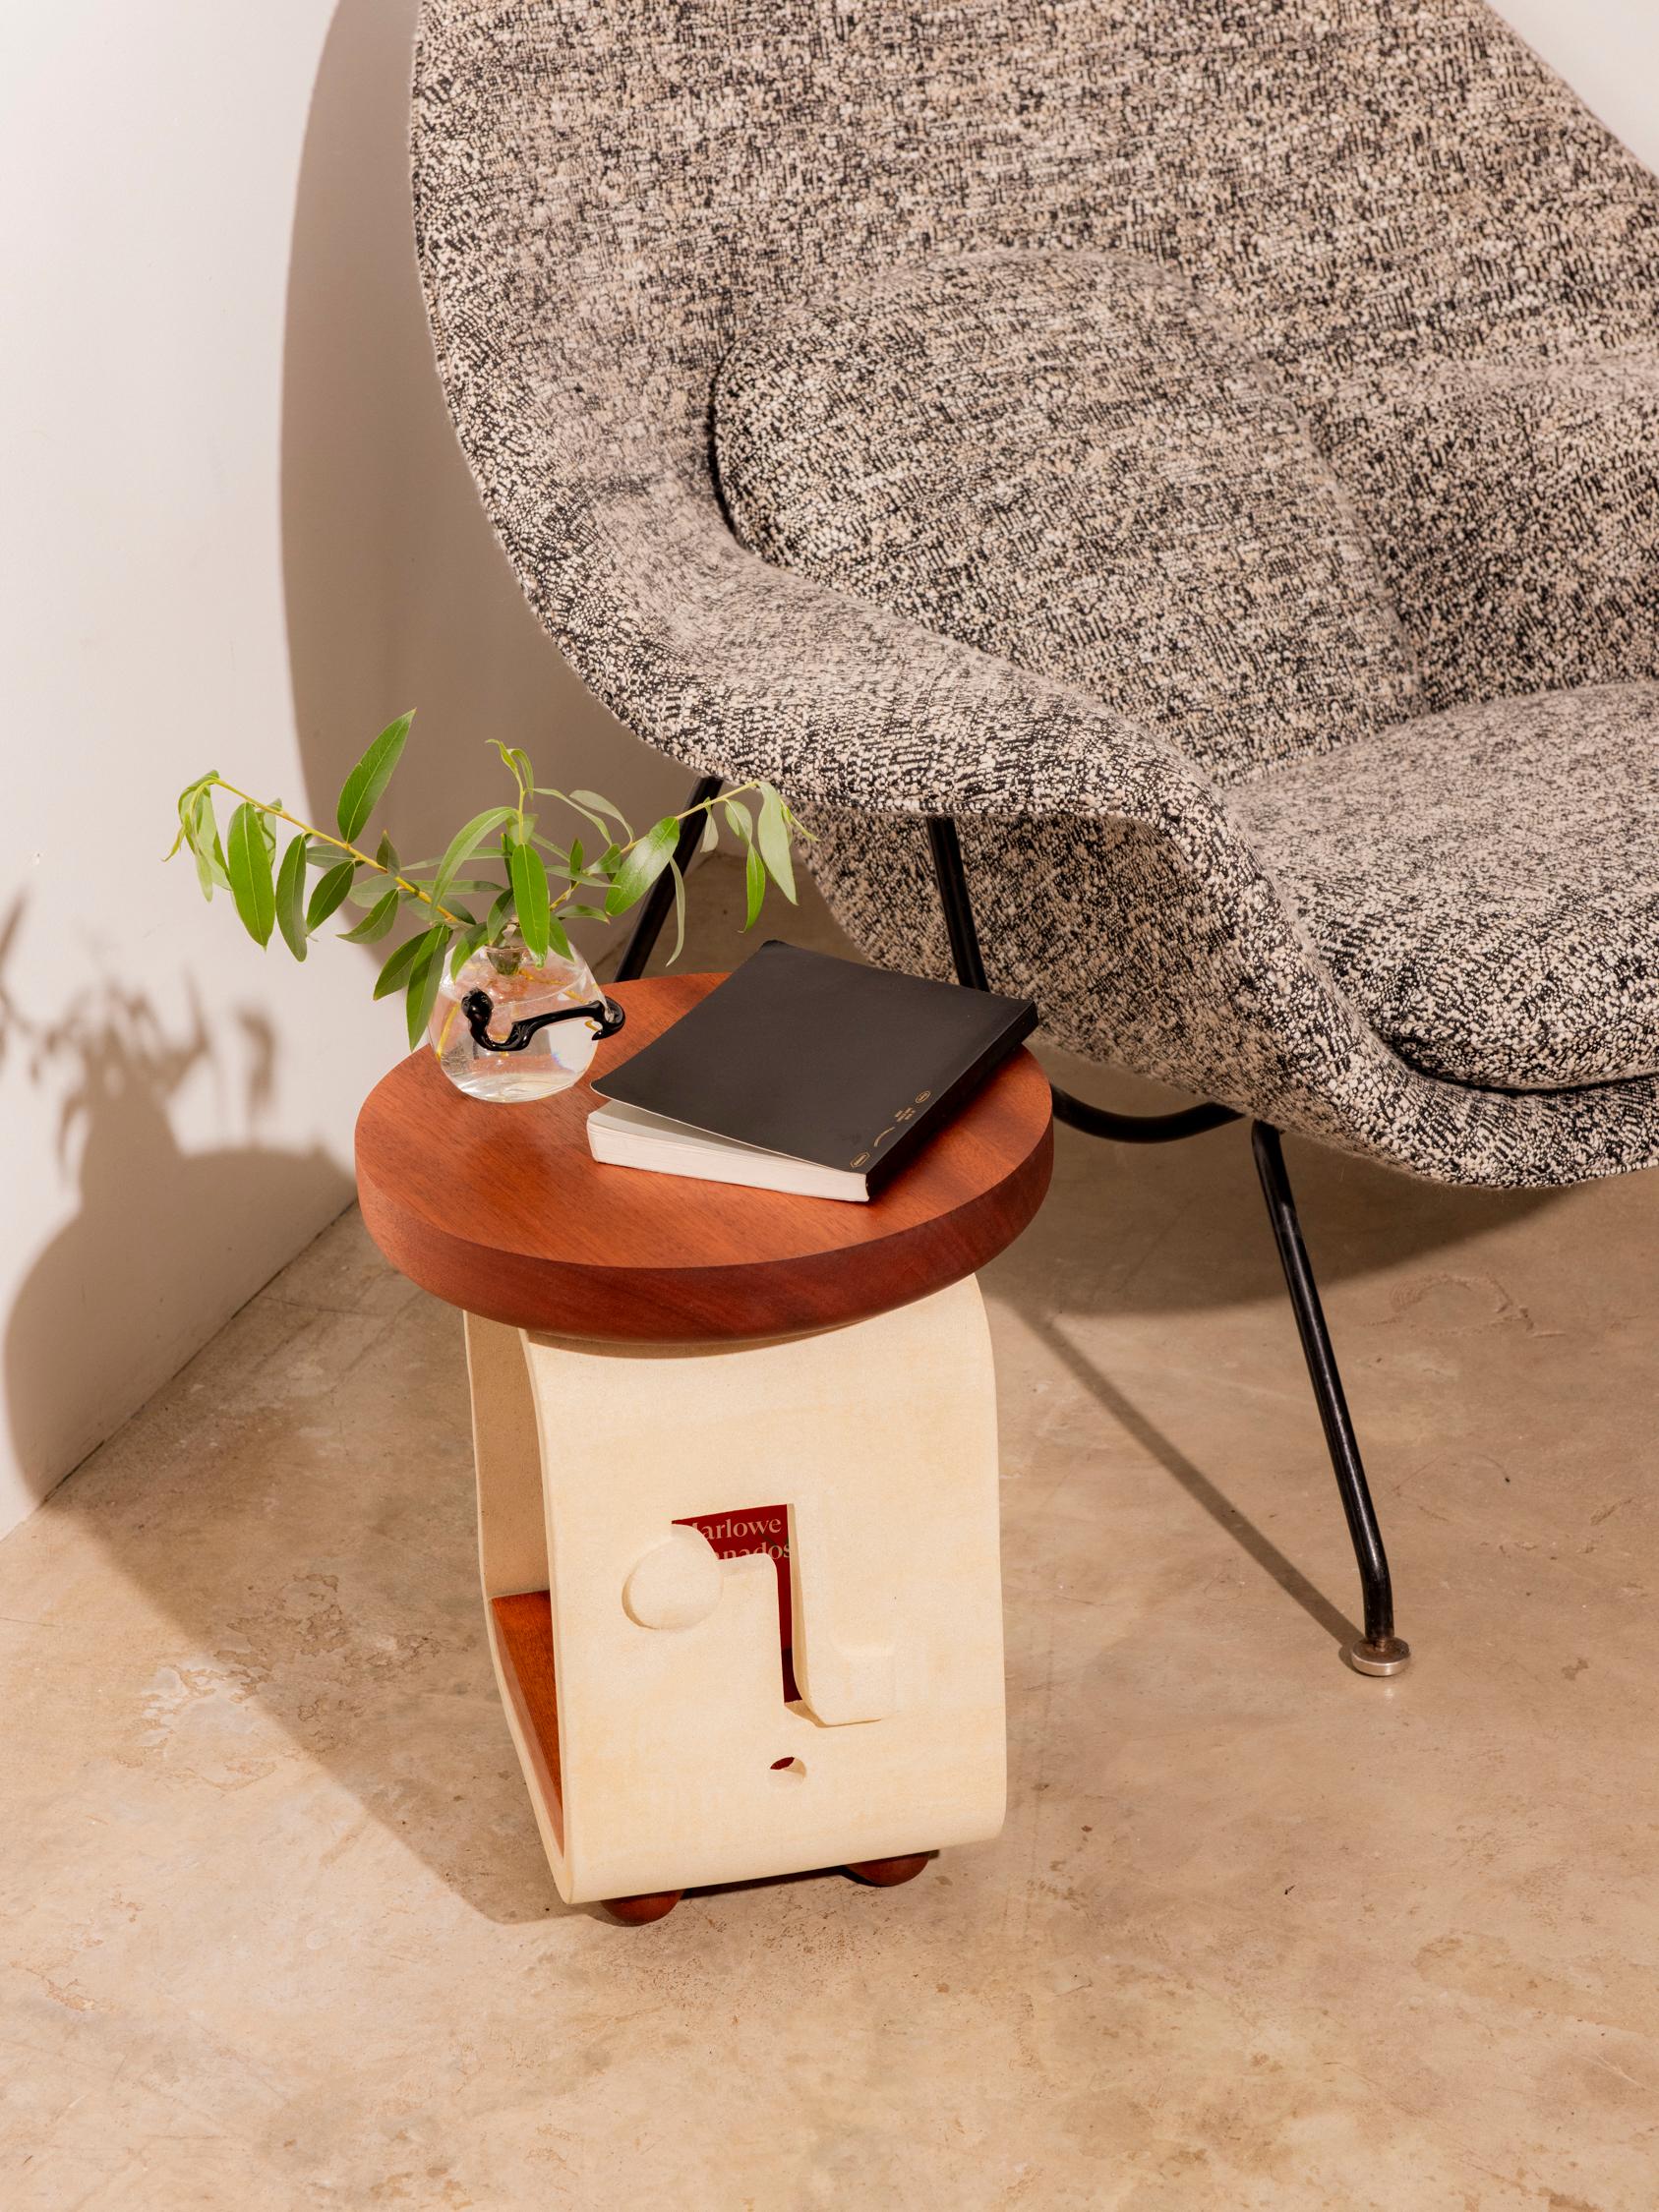 The Reader Side Table Mini in ceramic and wood is formed from a single slab of clay. The wooden table top, feet, and lower table join together with tendons through the ceramic base to create an honest and effortlessly piece making a playful union of